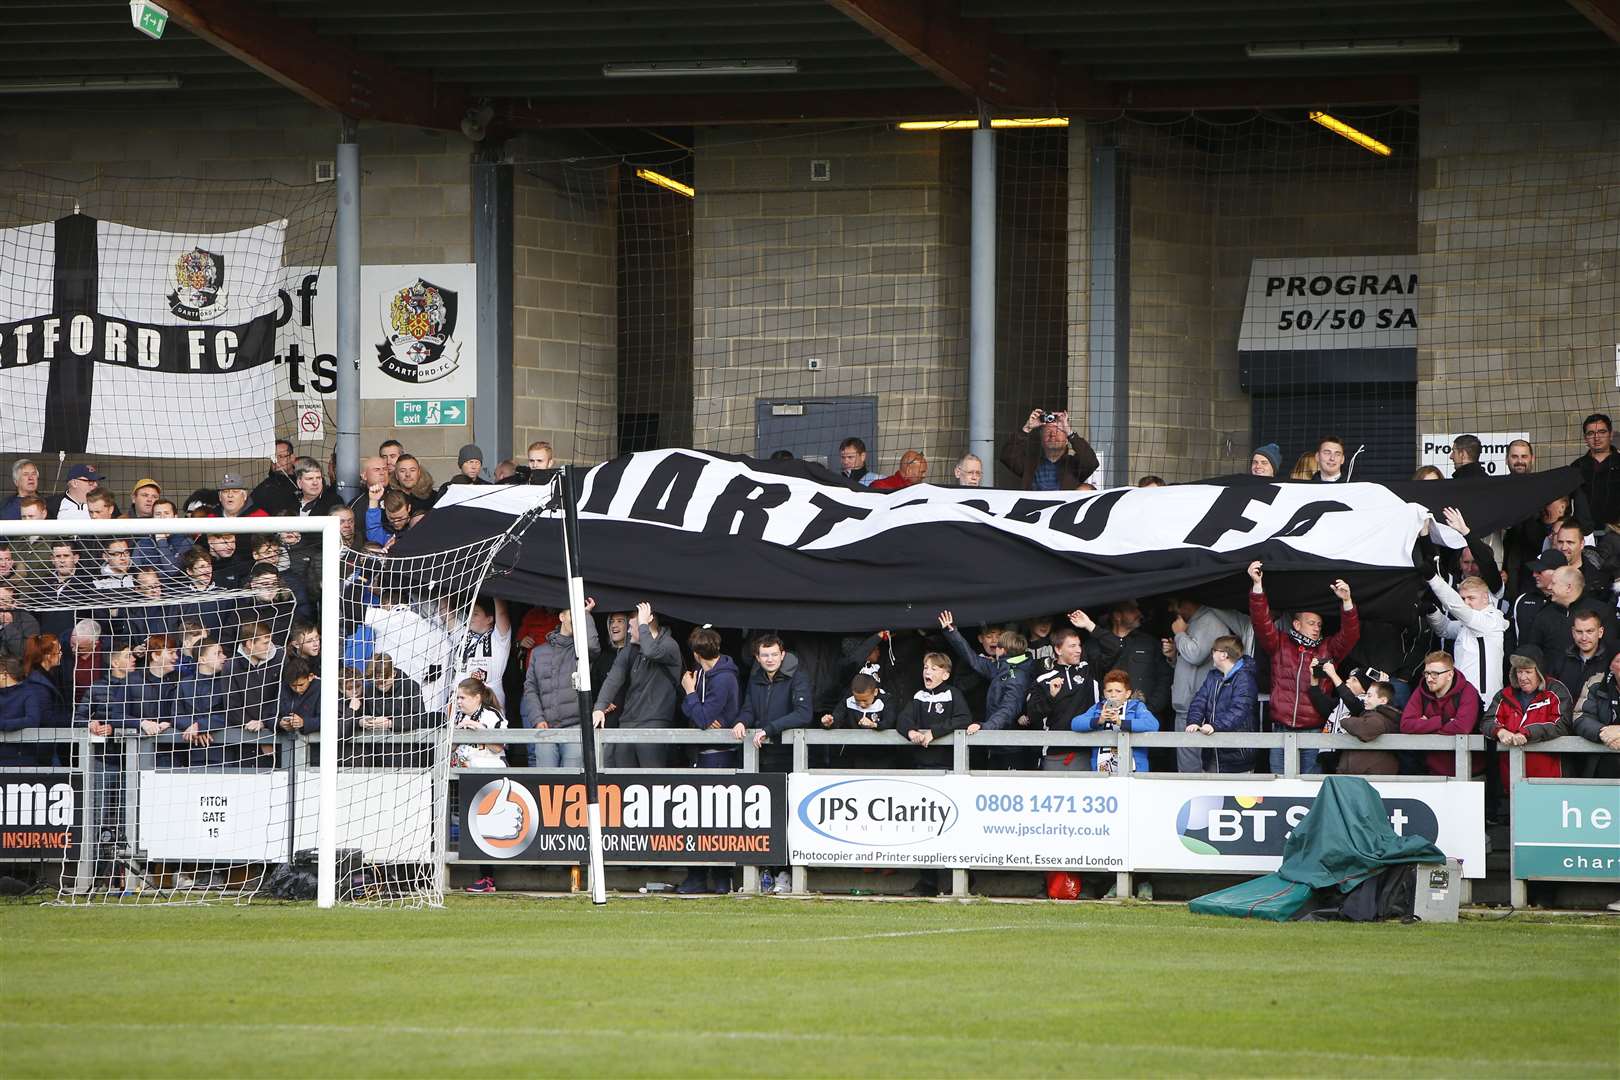 Dartford fans are not able to attend Sunday's play-off game at Slough Town